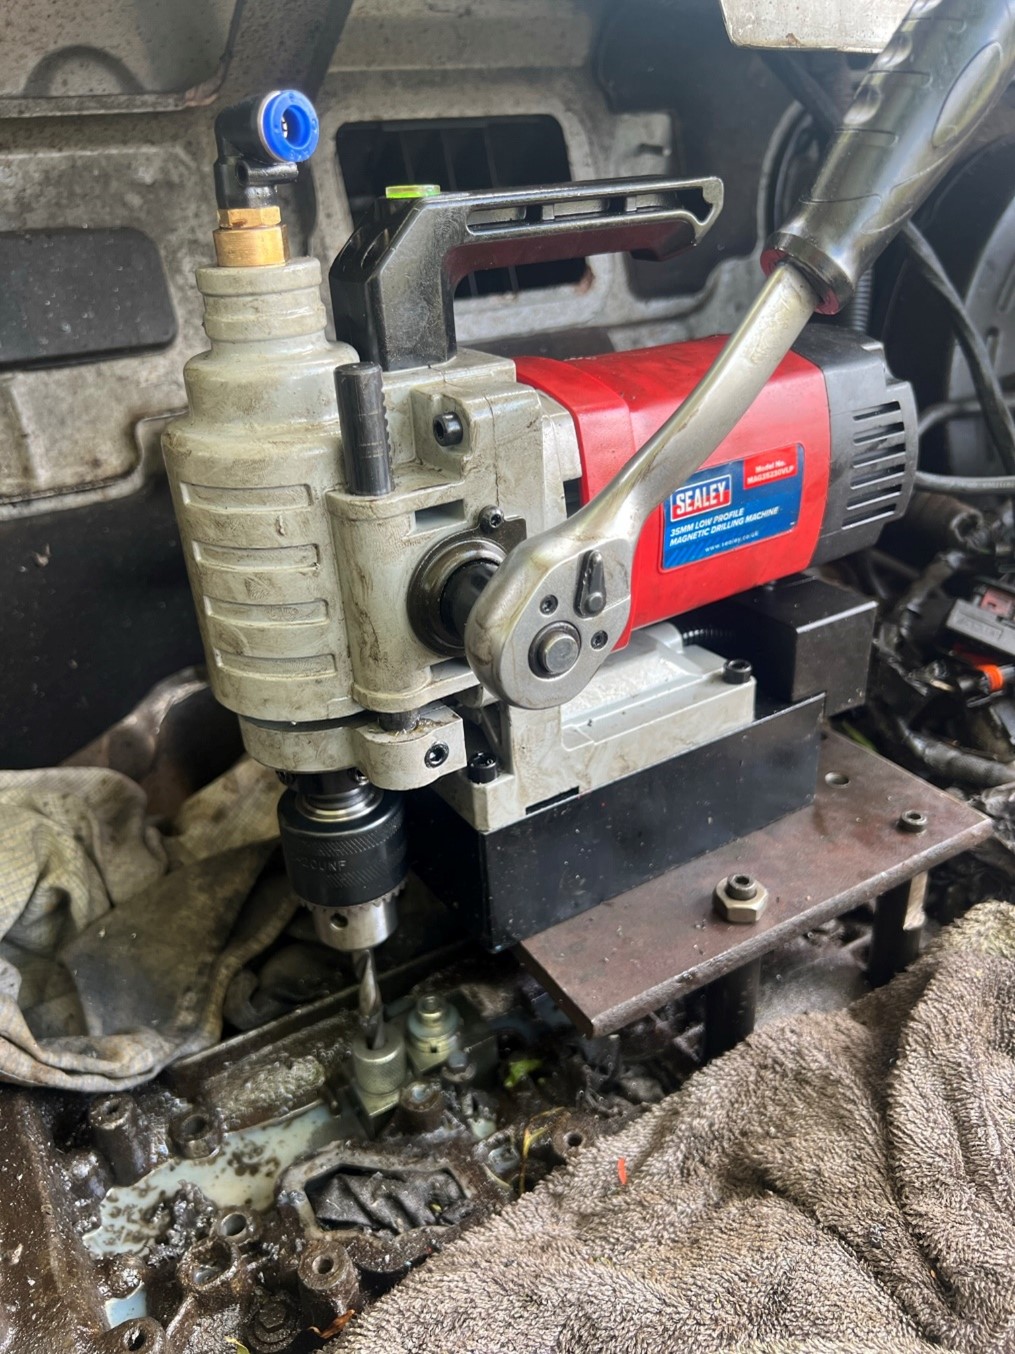 Snapped bolt removal drilling and repair